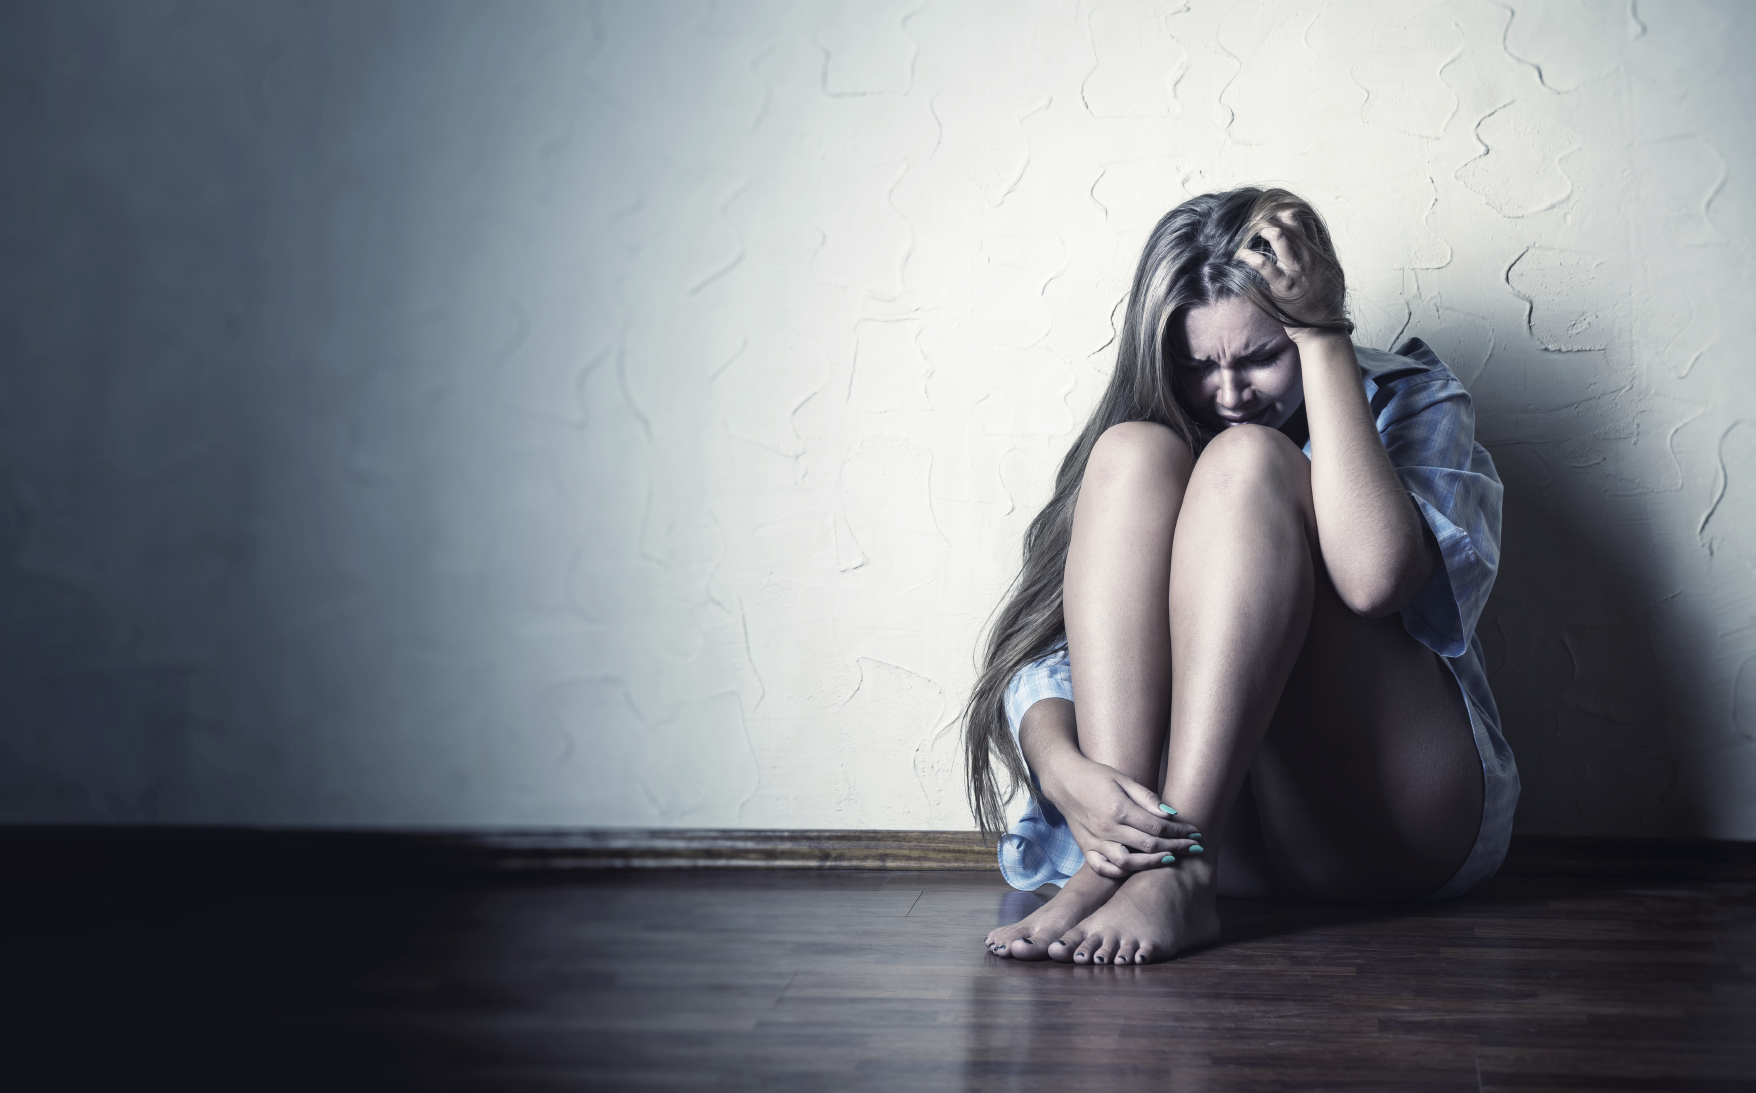 Policing the lockdown: Domestic abuse and vulnerability